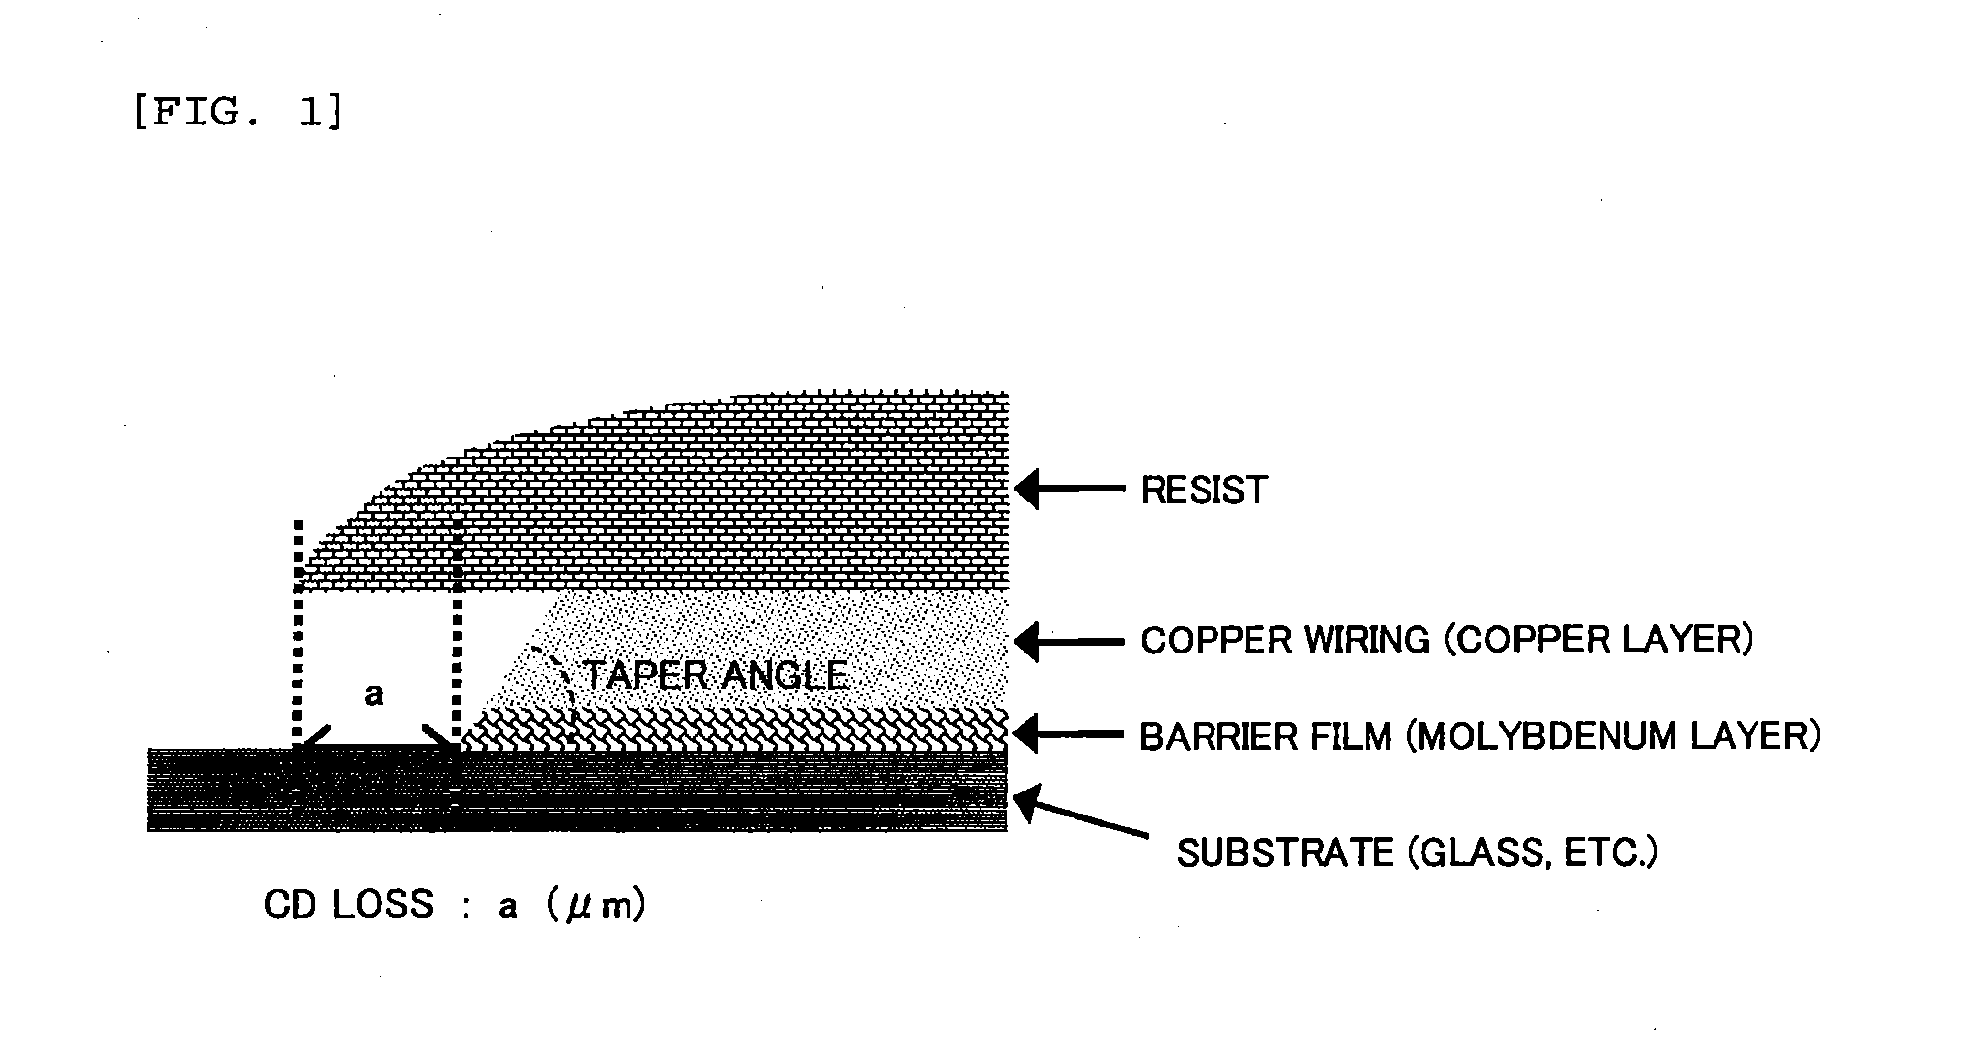 Etching solution for multilayer thin film having copper layer and molybdenum layer contained therein